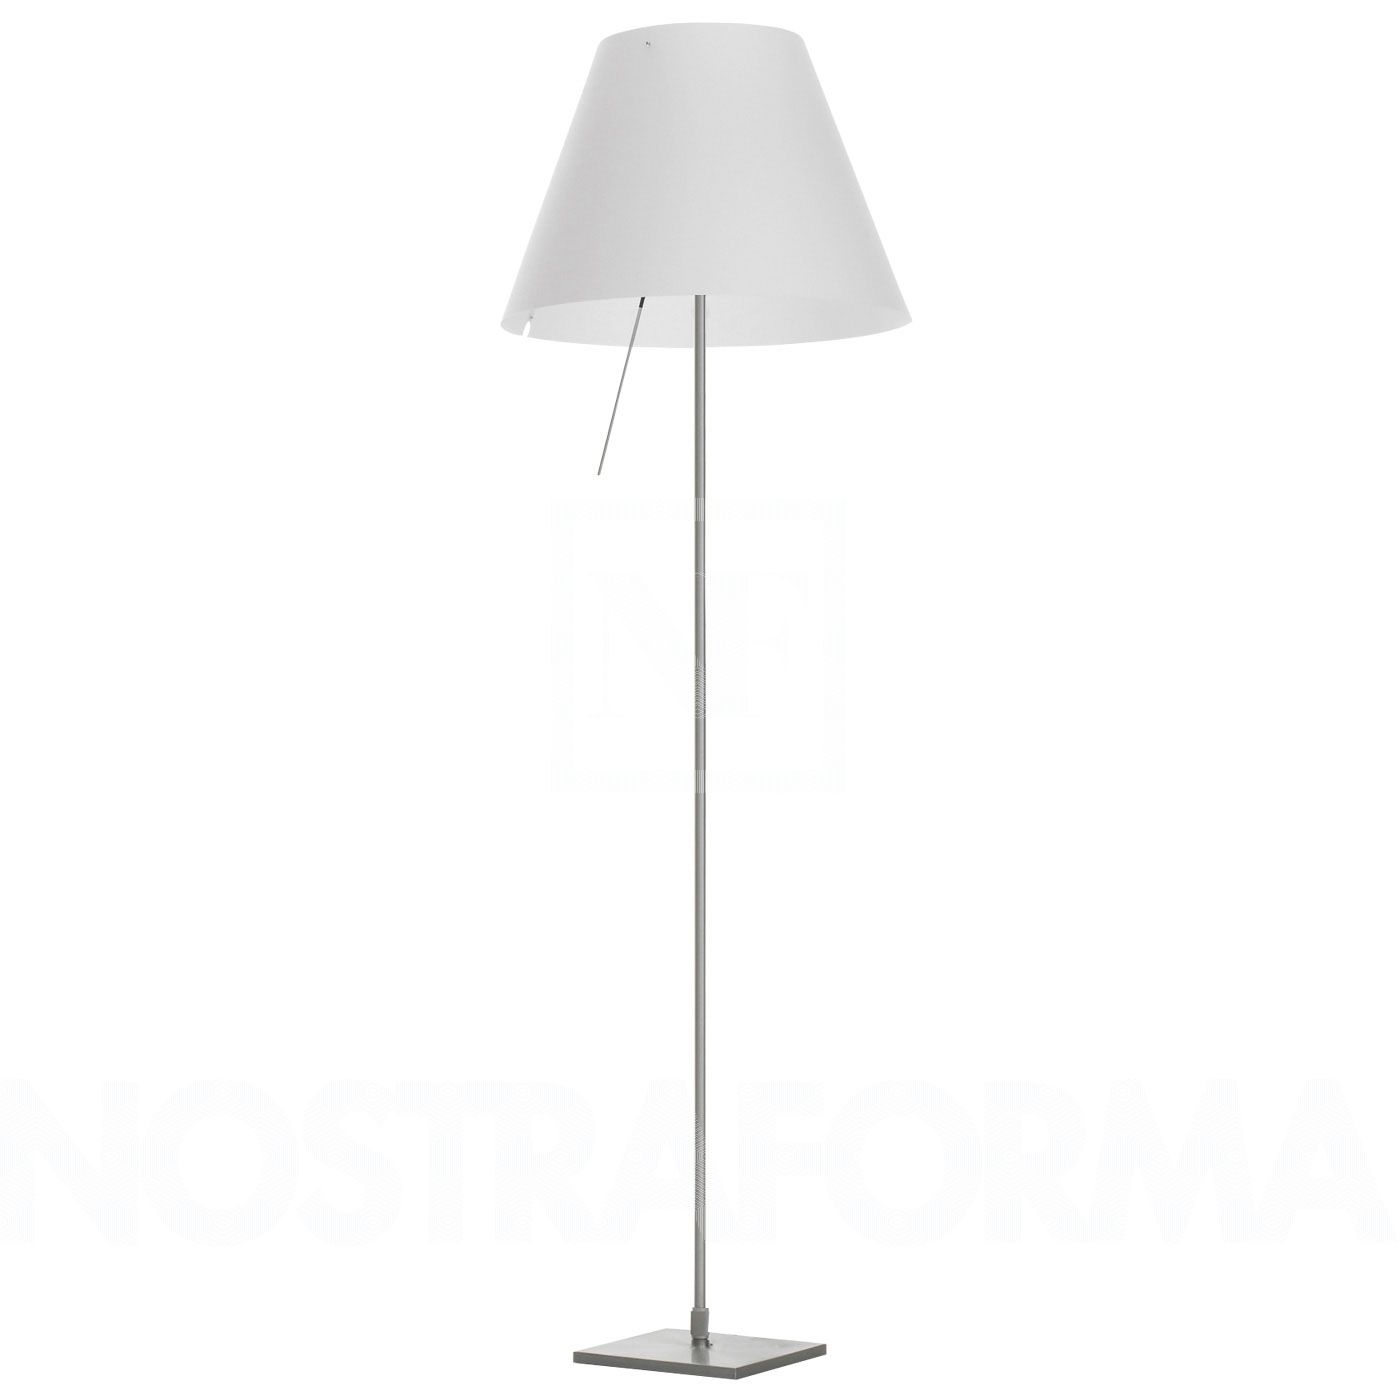 Luceplan Costanza 153 Aluminium Floor Lamp intended for size 1400 X 1400